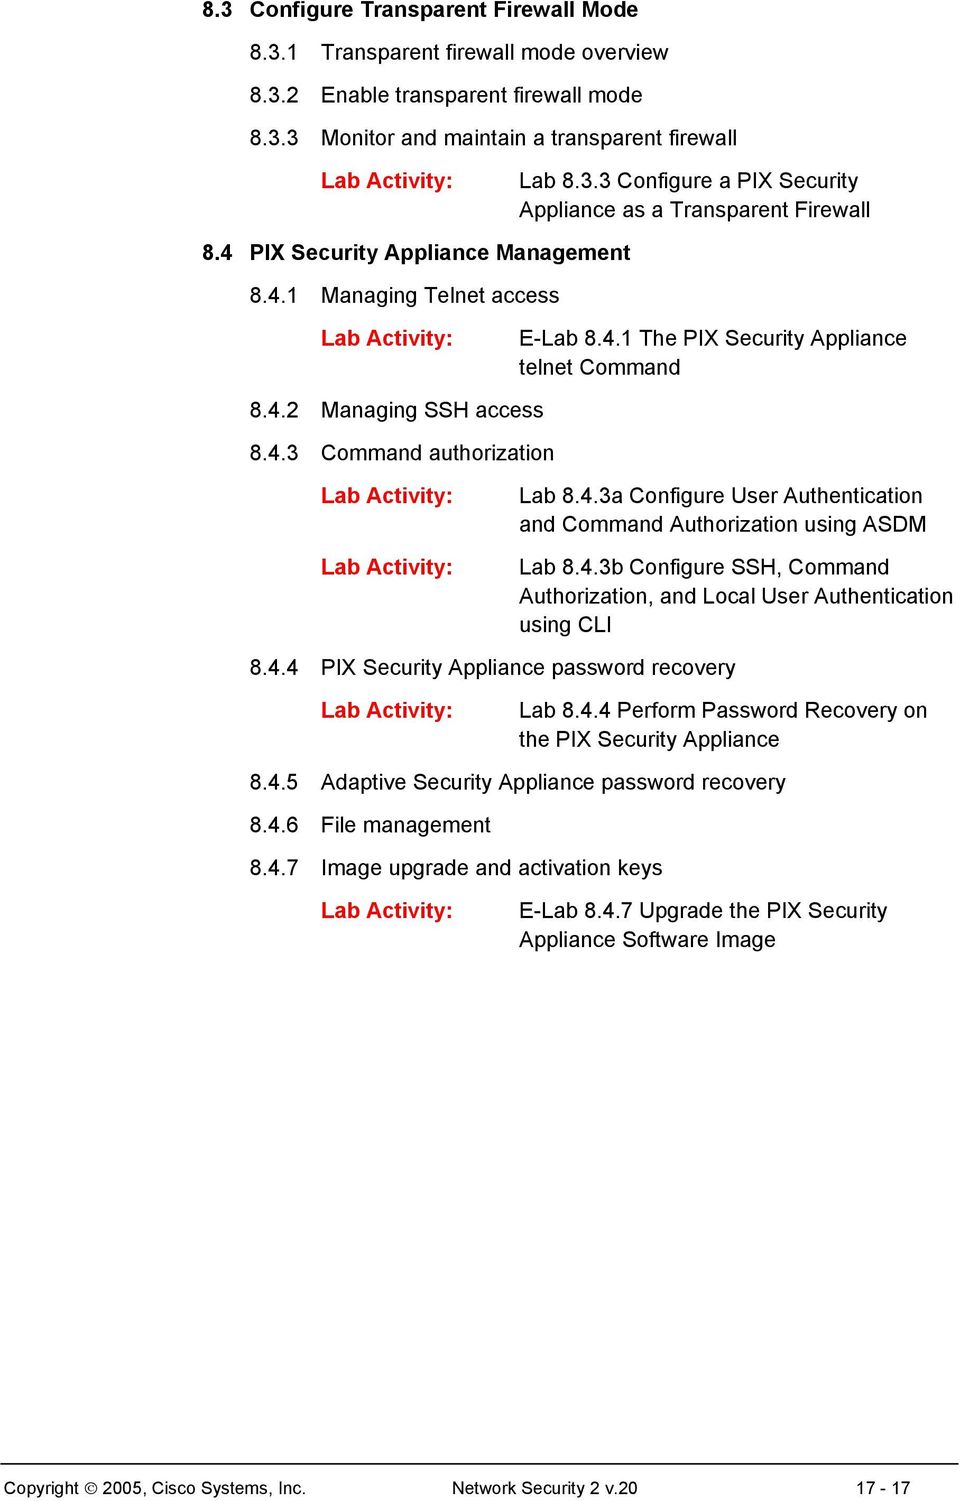 4.3b Configure SSH, Command Authorization, and Local User Authentication using CLI 8.4.4 PIX Security Appliance password recovery Lab 8.4.4 Perform Password Recovery on the PIX Security Appliance 8.4.5 Adaptive Security Appliance password recovery 8.